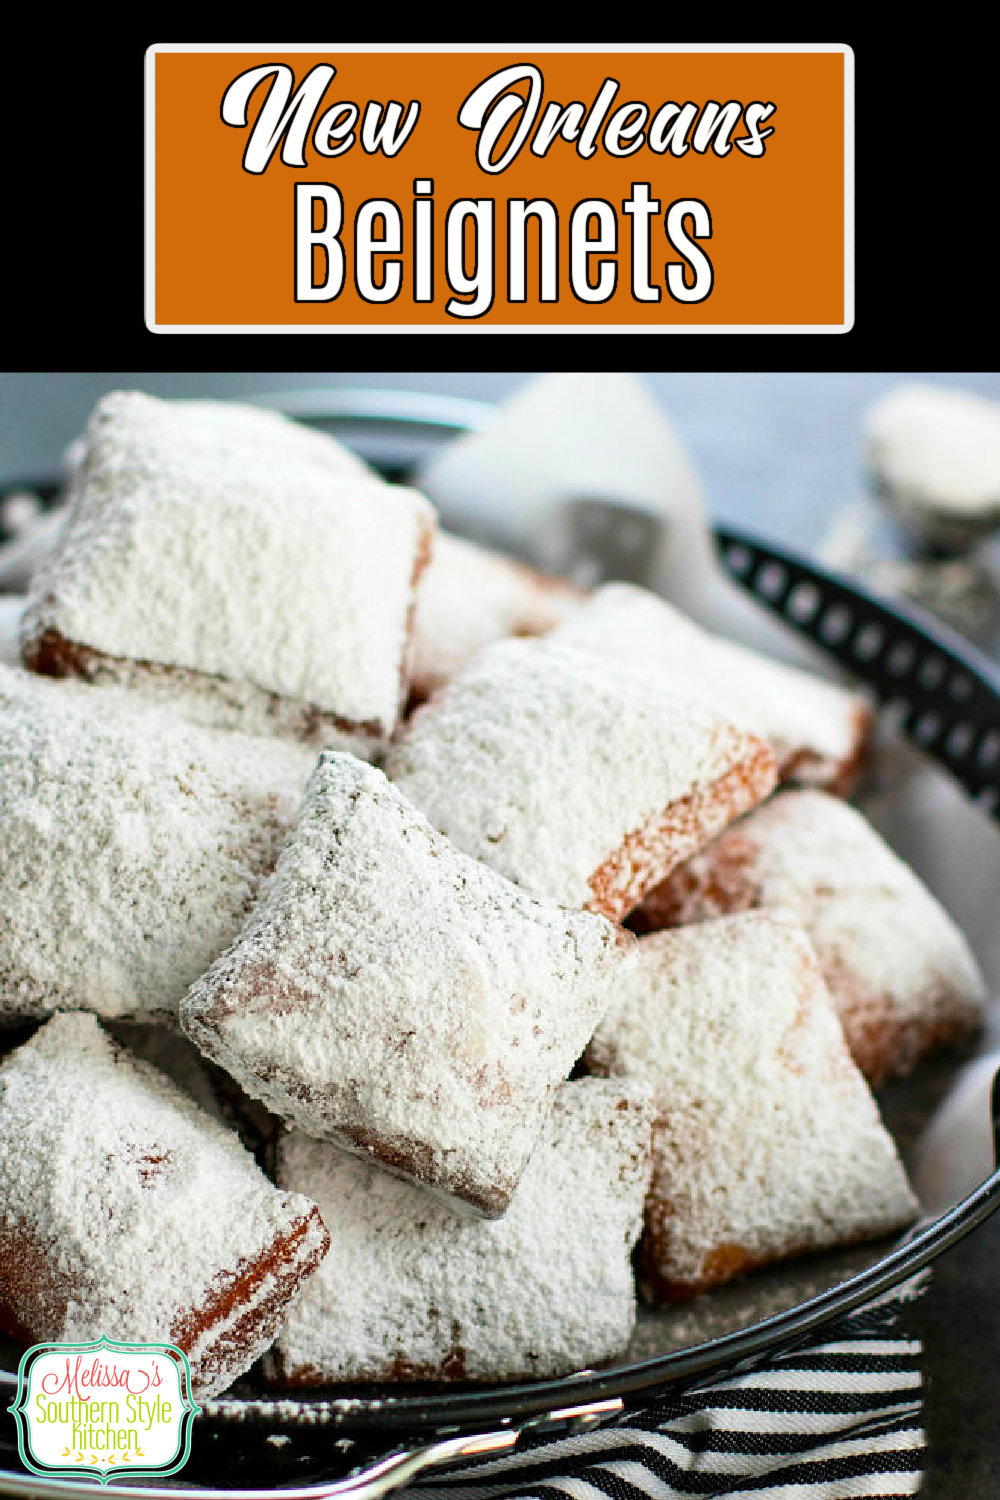 These fluffy NOLA style Beignets are a treat any time of day #beignets #mardisgrasrecipes #NOLA #sweets #desserts #beignetsrecipe #bestbeignets #southernrecipes